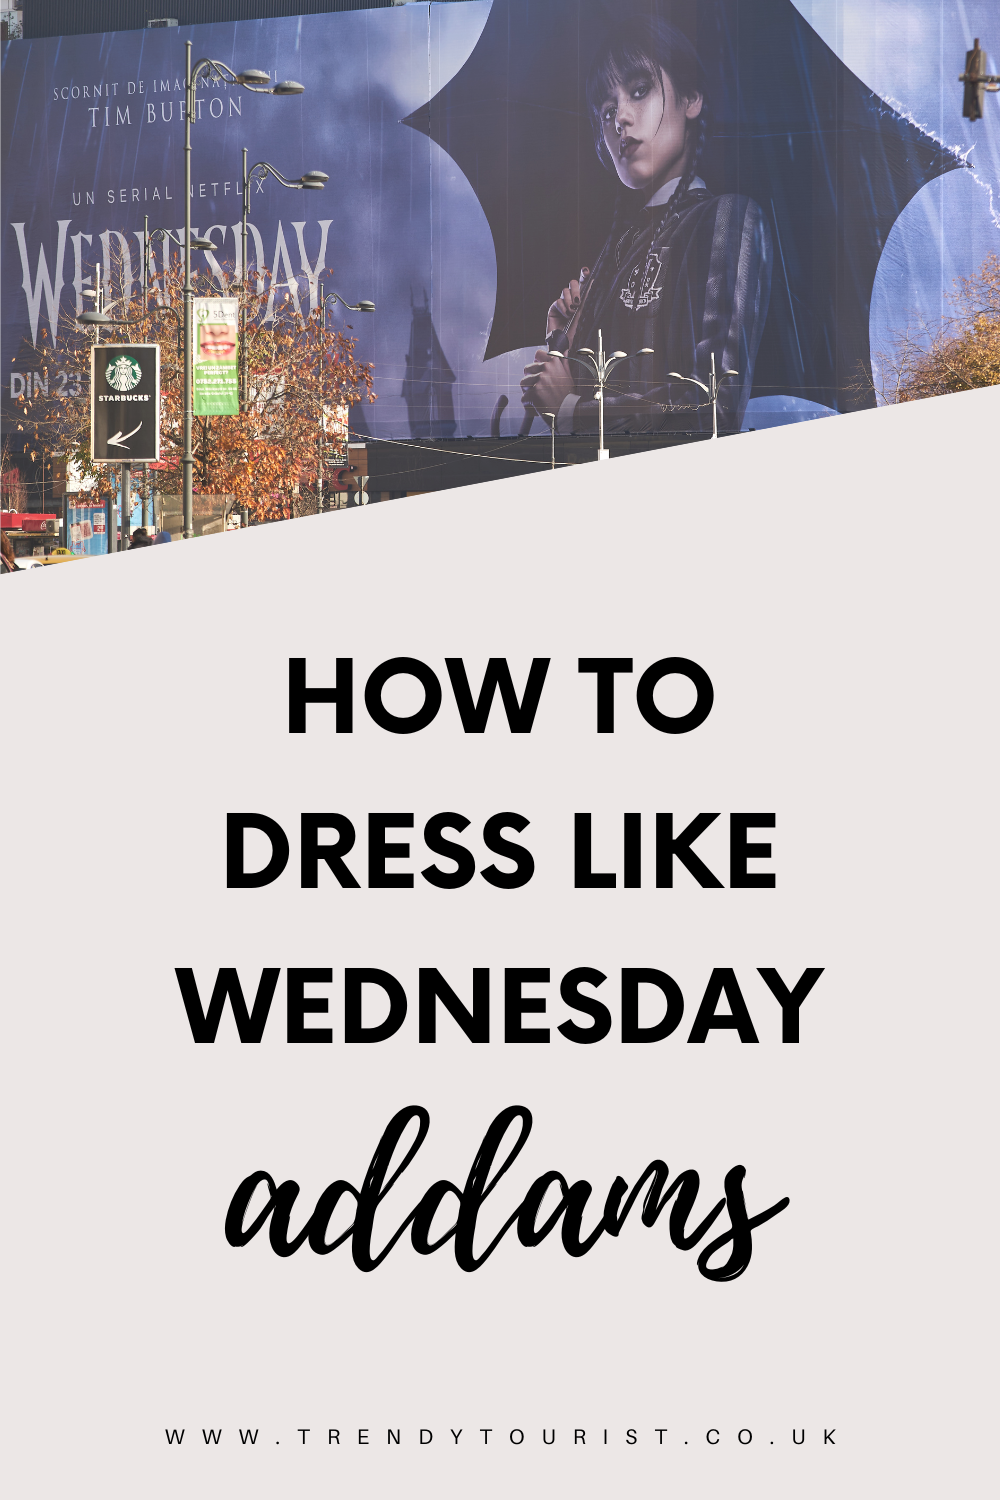 How to Dress Like Wednesday Addams: Tips and Outfit Ideas